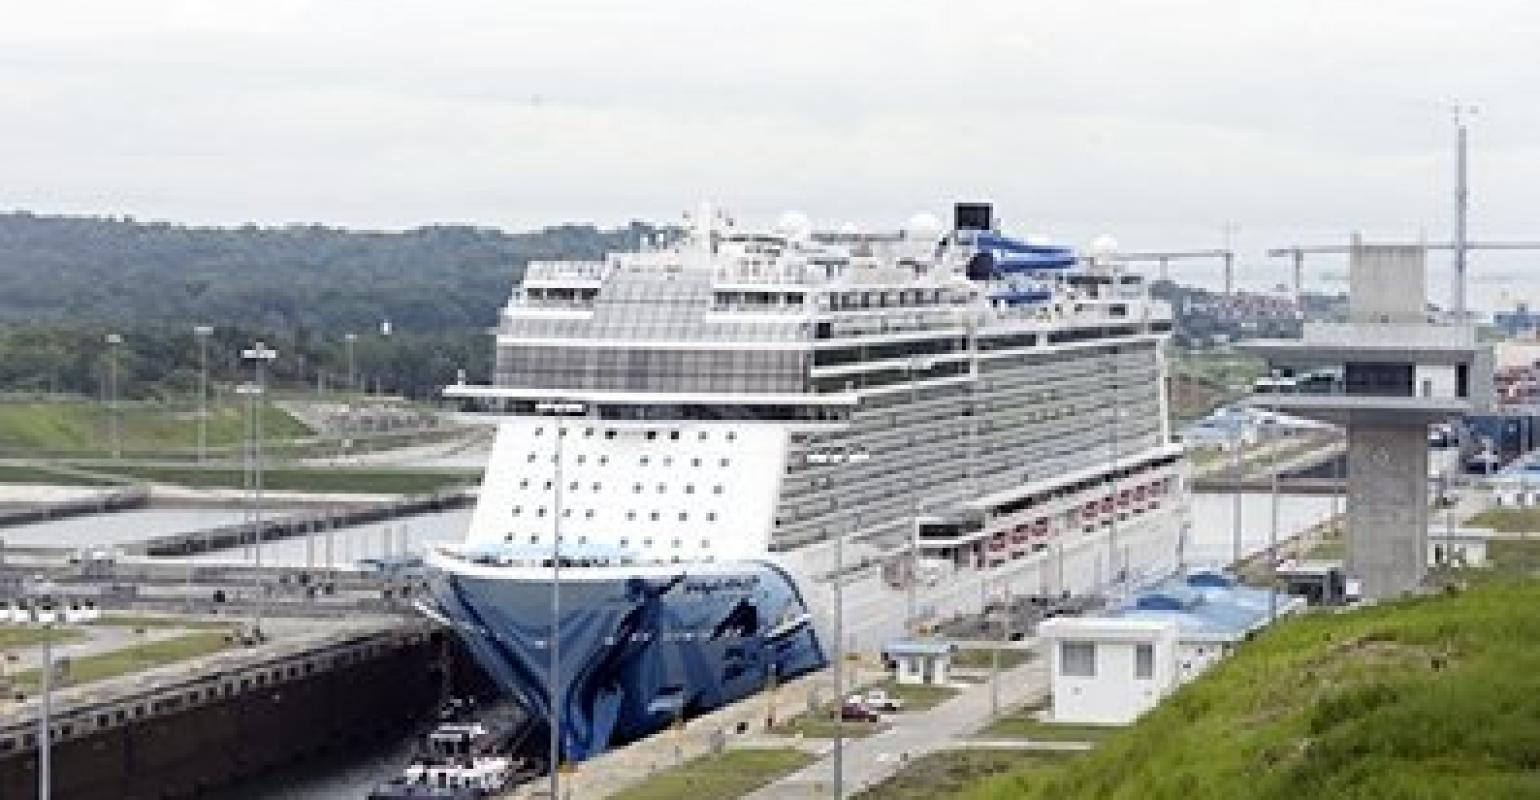 Over 230 Cruise Ships Set To Visit The Panama Canal In 2018 19